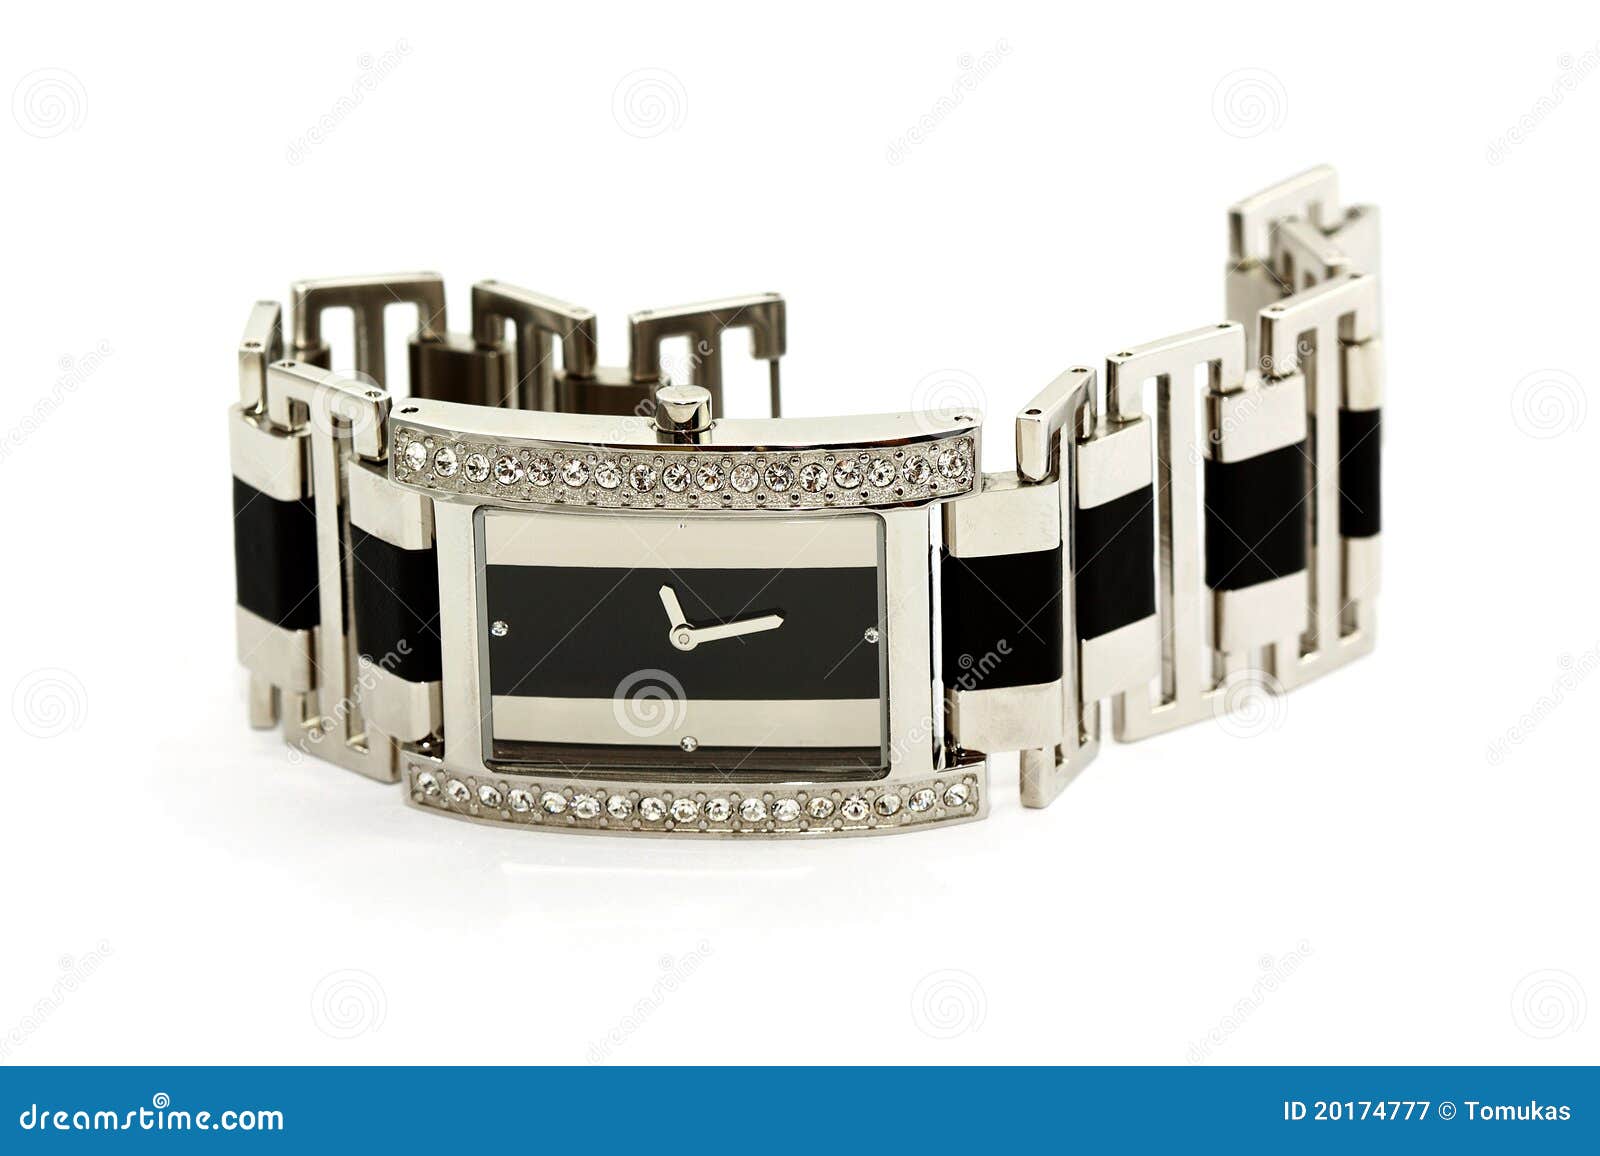 Female Silver Wrist Watch with Diamonds Stock Image - Image of clothing ...